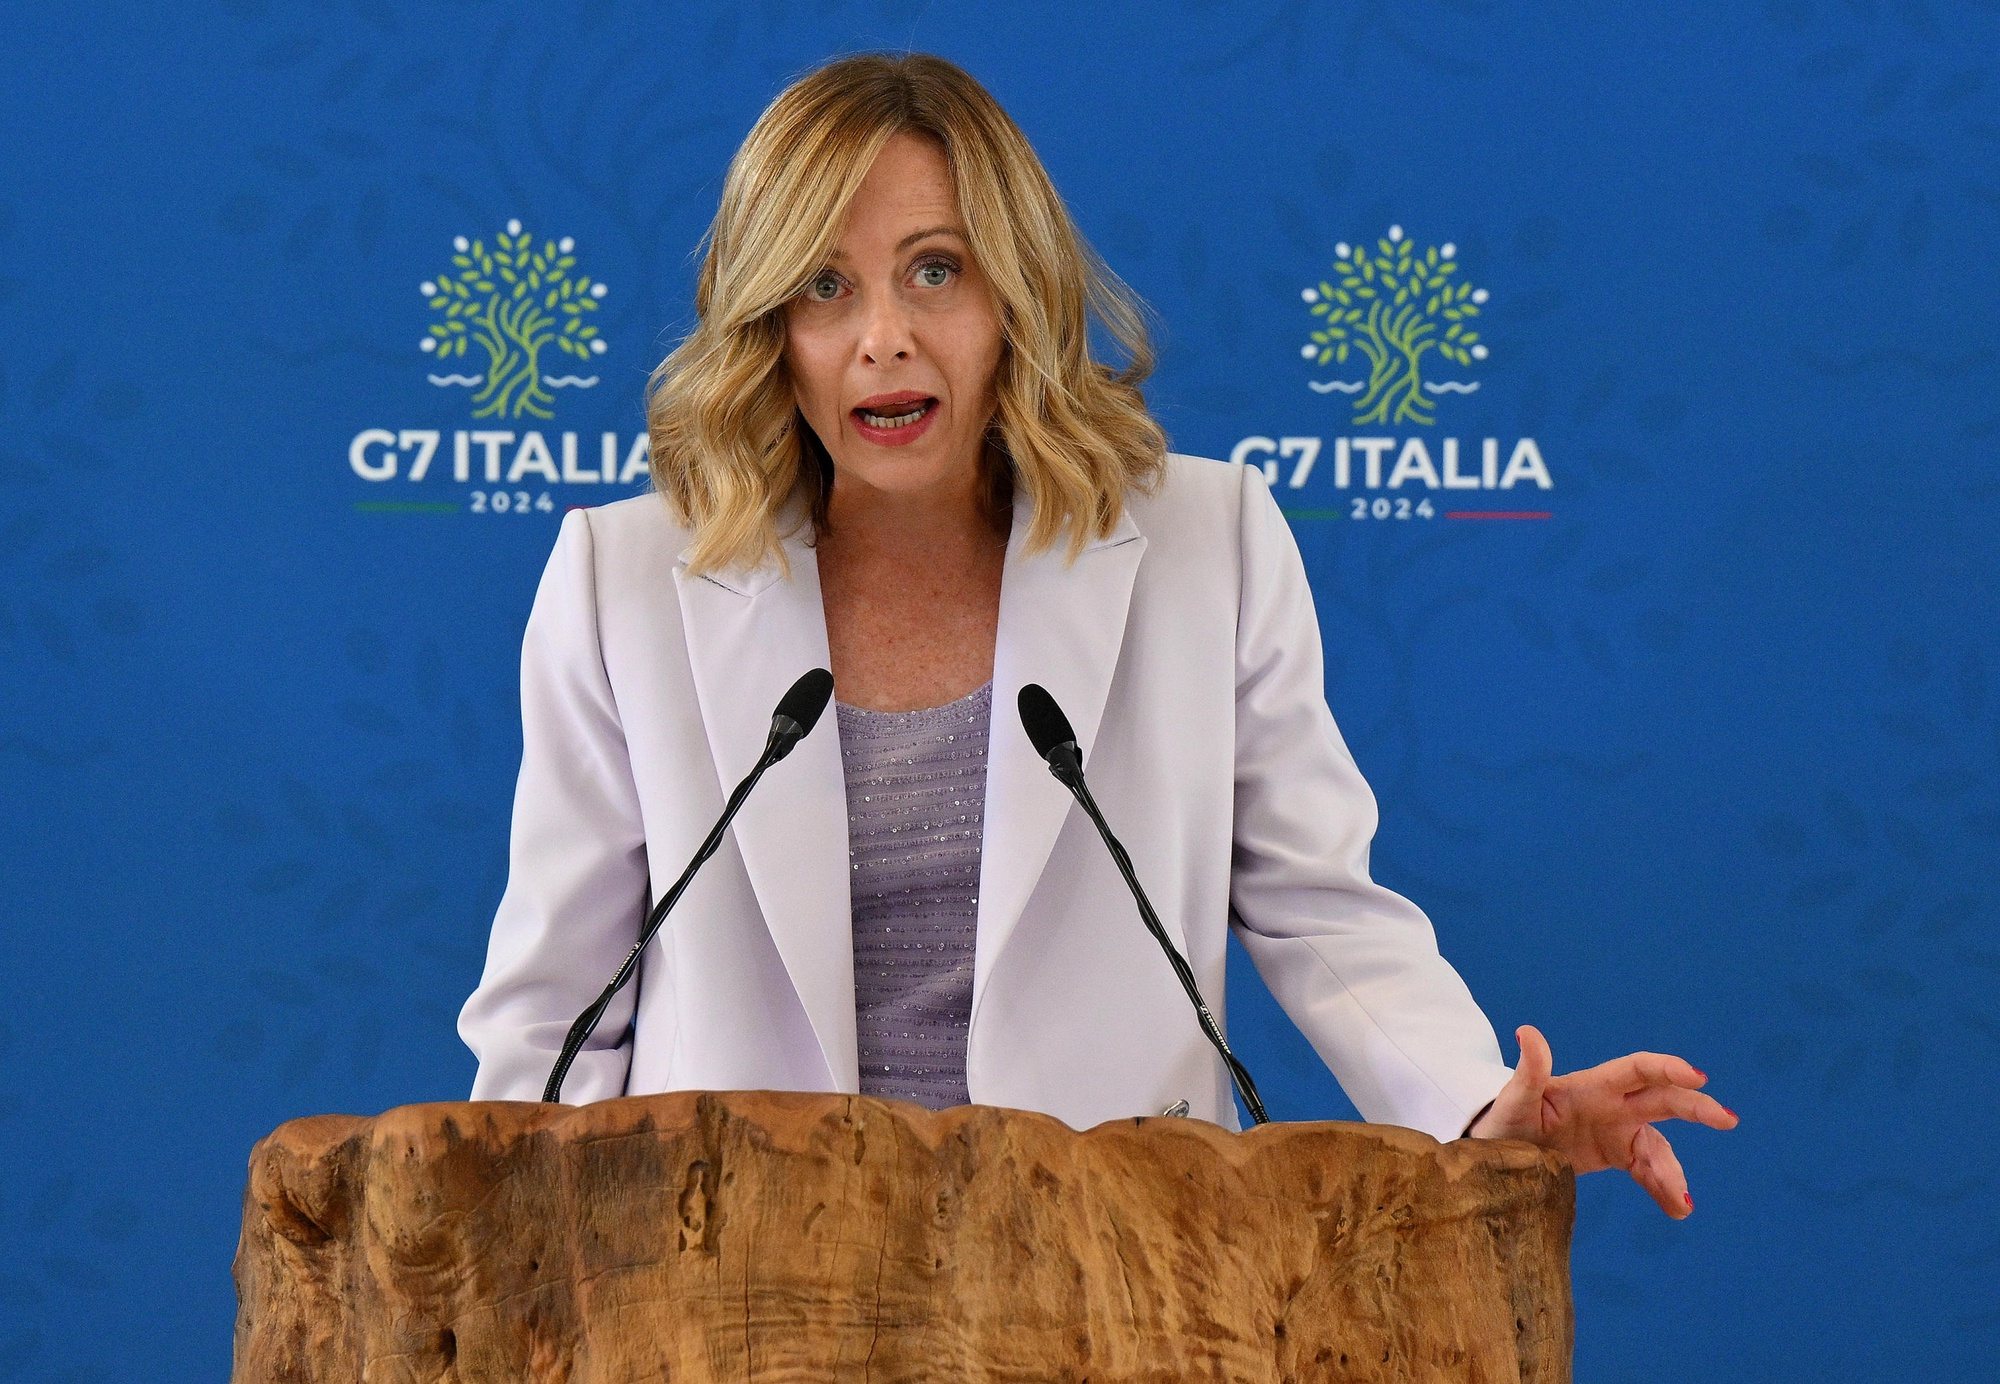 epa11411876 Italian Prime Minister Giorgia Meloni holds a press conference after the G7 summit at Borgo Egnazia resort in Savelletri, southern Italy, 15 June 2024. The 50th G7 summit brought together the Group of Seven member states leaders in Borgo Egnazia resort in southern Italy from 13 to 15 June 2024.  EPA/ETTORE FERRARI